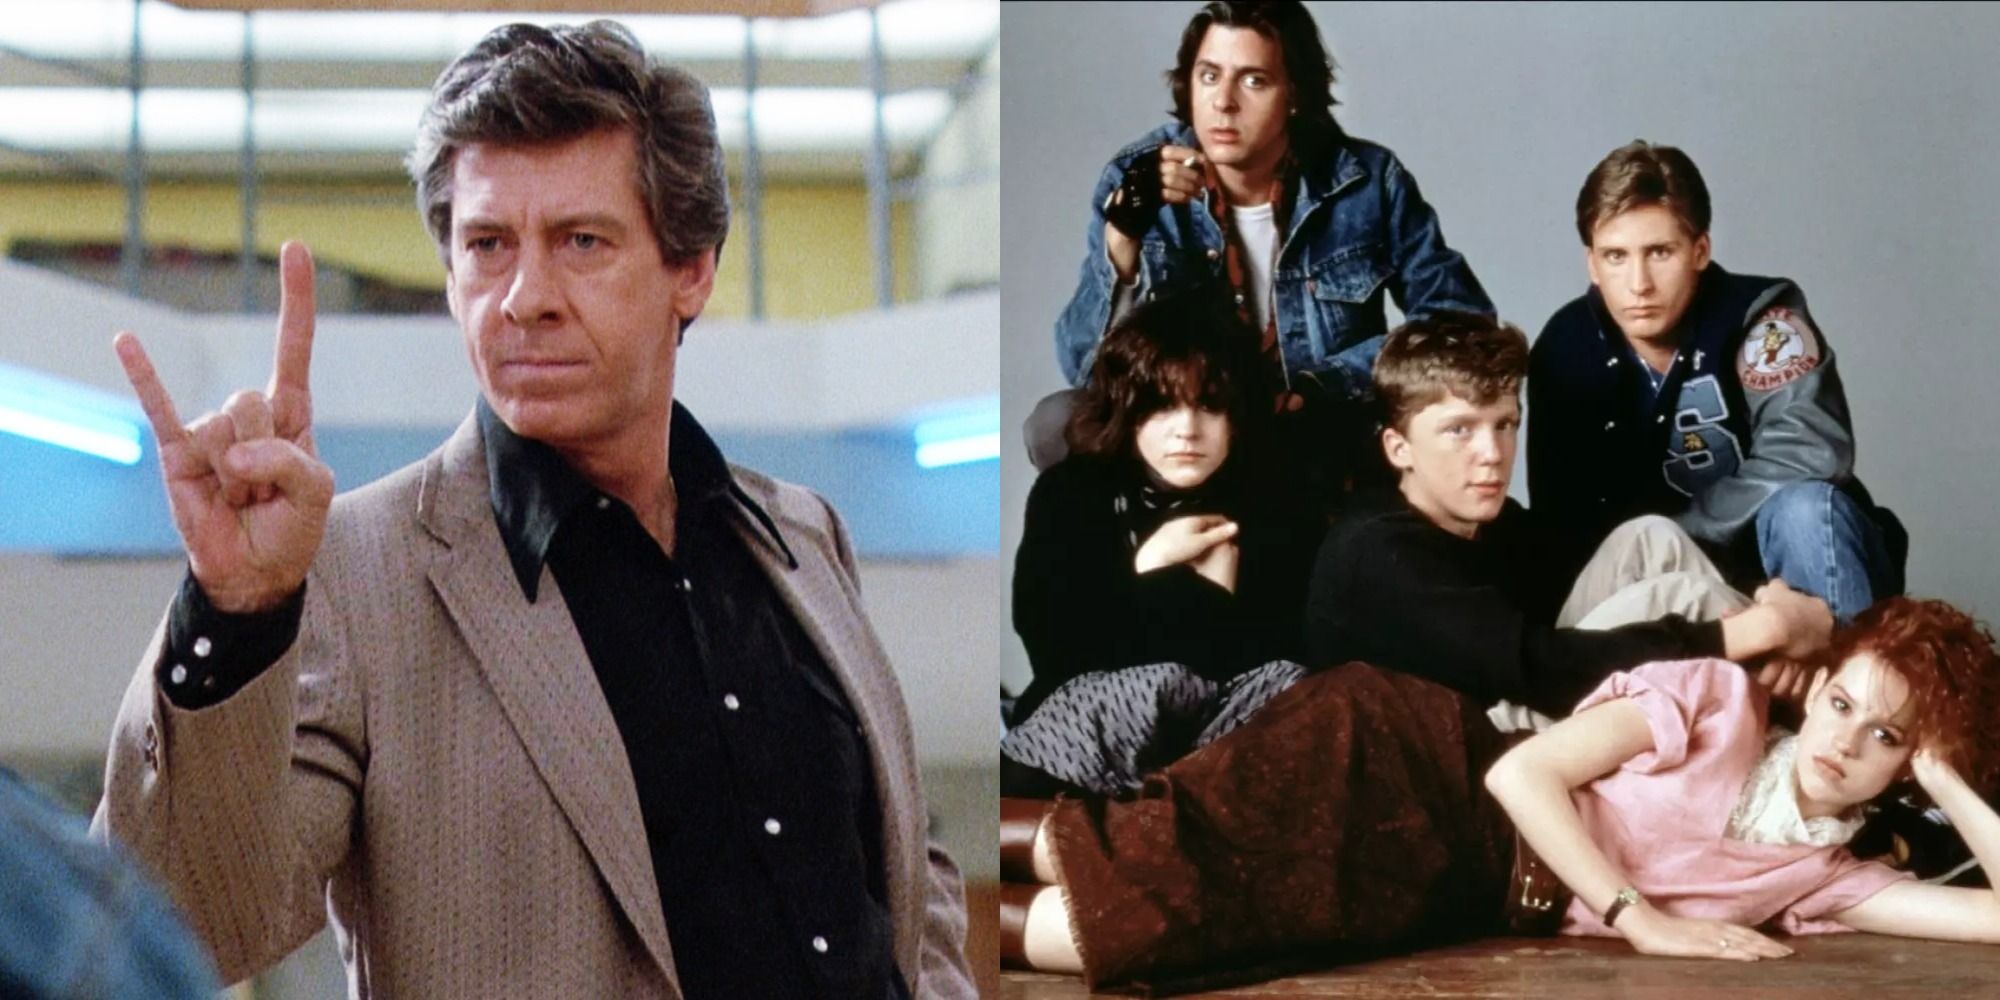 Split image of Vernon making a hand gesture, and the Brat Pack posing in the Breakfast Club